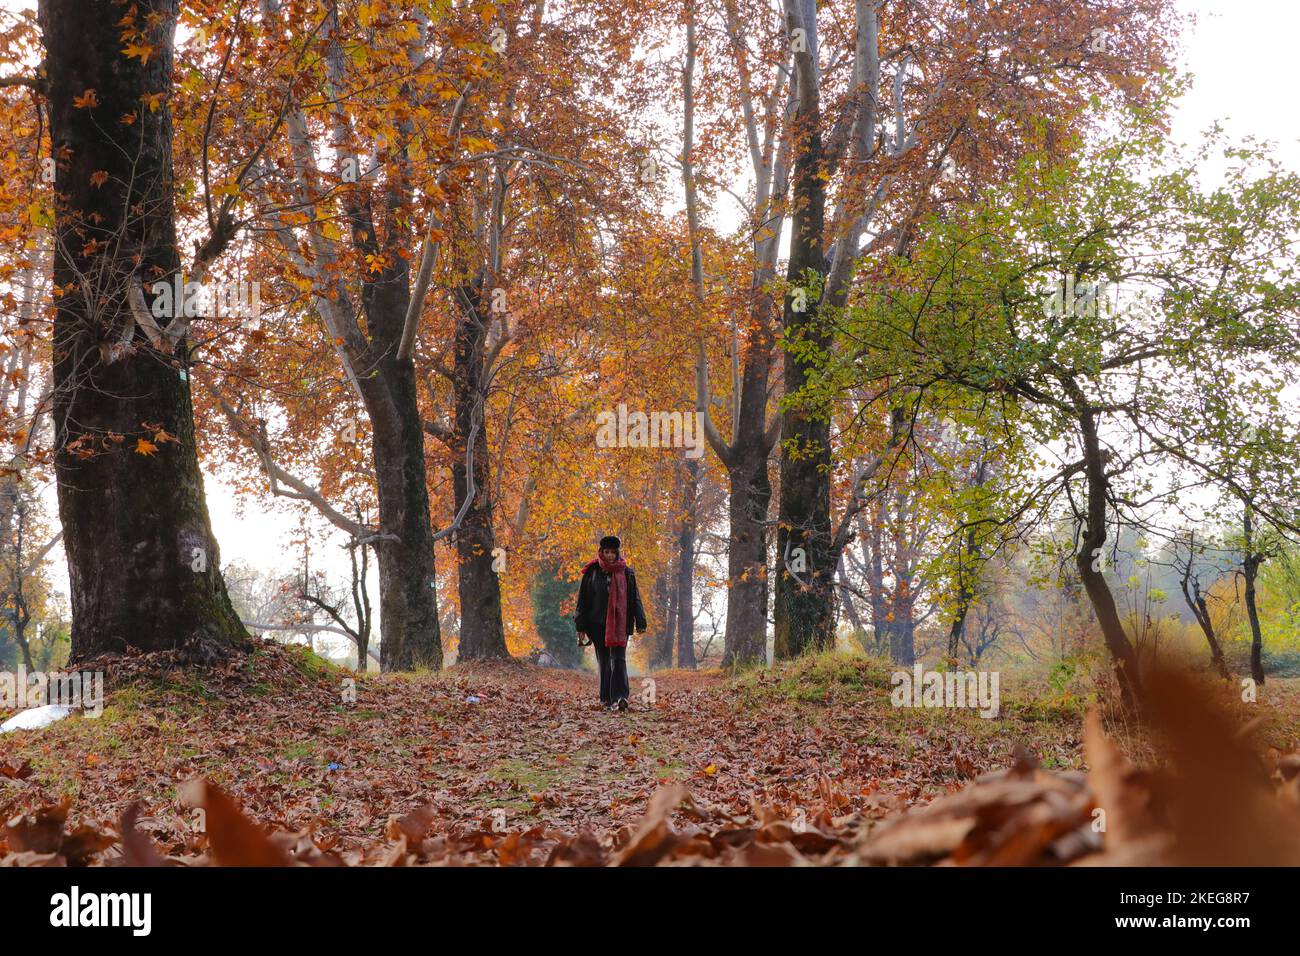 November 12, 2022, Srinagar, Jammu and Kashmir, India: A woman walks on fallen leaves of mighty Chinar tree at the famous Nishat Garden, Srinagar, Kashmir. Autumn colors are reaching their peak with trees particularly Chinar changing their colors as the days are becoming shorter showcasing the approach of winter in Kashmir. (Credit Image: © Adil Abbas/ZUMA Press Wire) Stock Photo